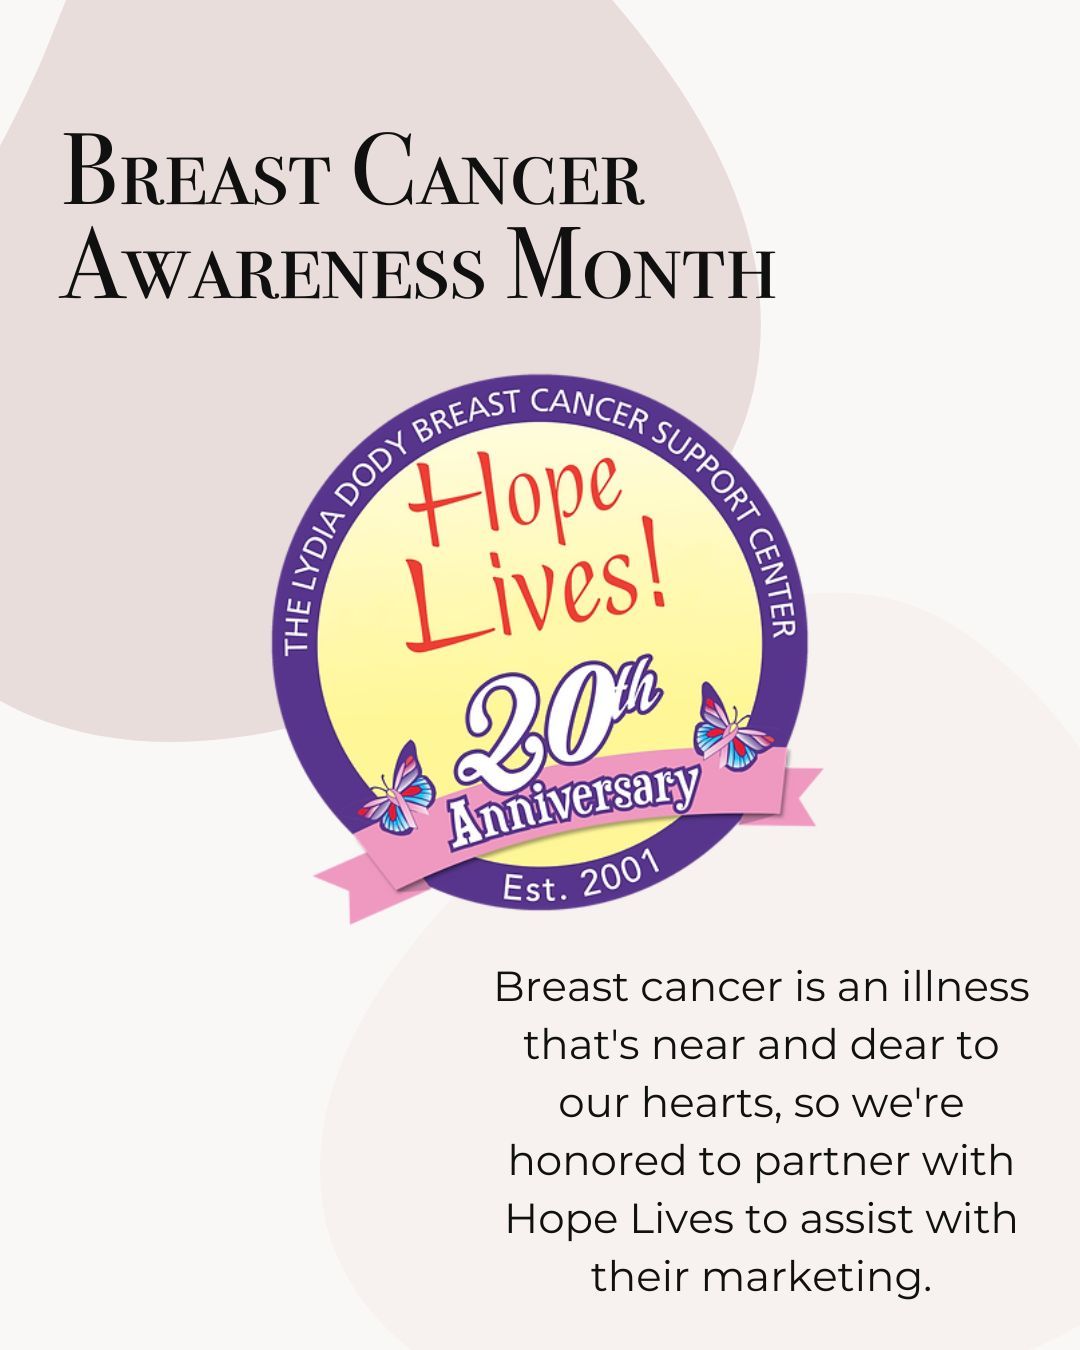 Breast cancer is an issue that's near and dear to us, so we're honored to partner with Hope Lives! on their marketing efforts! 

@hopelivesfc is a nonprofit that adds quality of life to breast cancer patients by offering integrative support services and products that help manage the physical, emotional, social, & financial side effects of breast cancer treatment.

We partner with the team at Hope Lives! to provide social media support, marketing strategy consultations, and miscellaneous support to help take the burden off their team that already does so much for our community! 

If you or someone you know is battling breast cancer's physical and emotional toll, check out Hope Lives! resources for help.